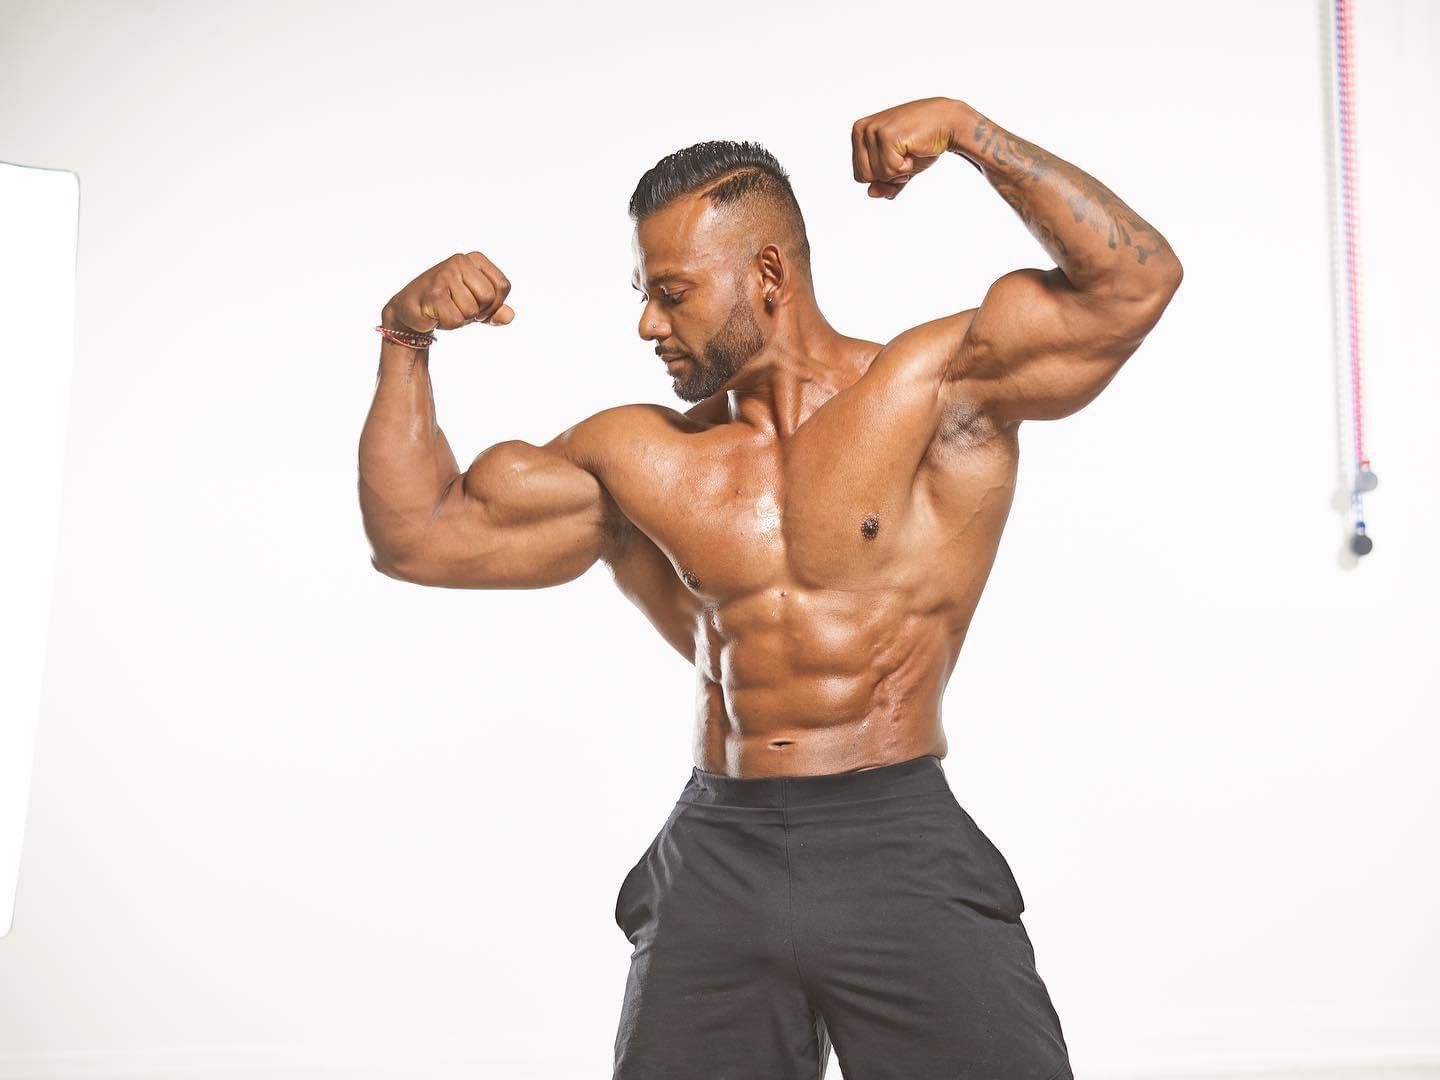 Learn The How’s And What’s Of Fitness From A Professional: Shane Makan